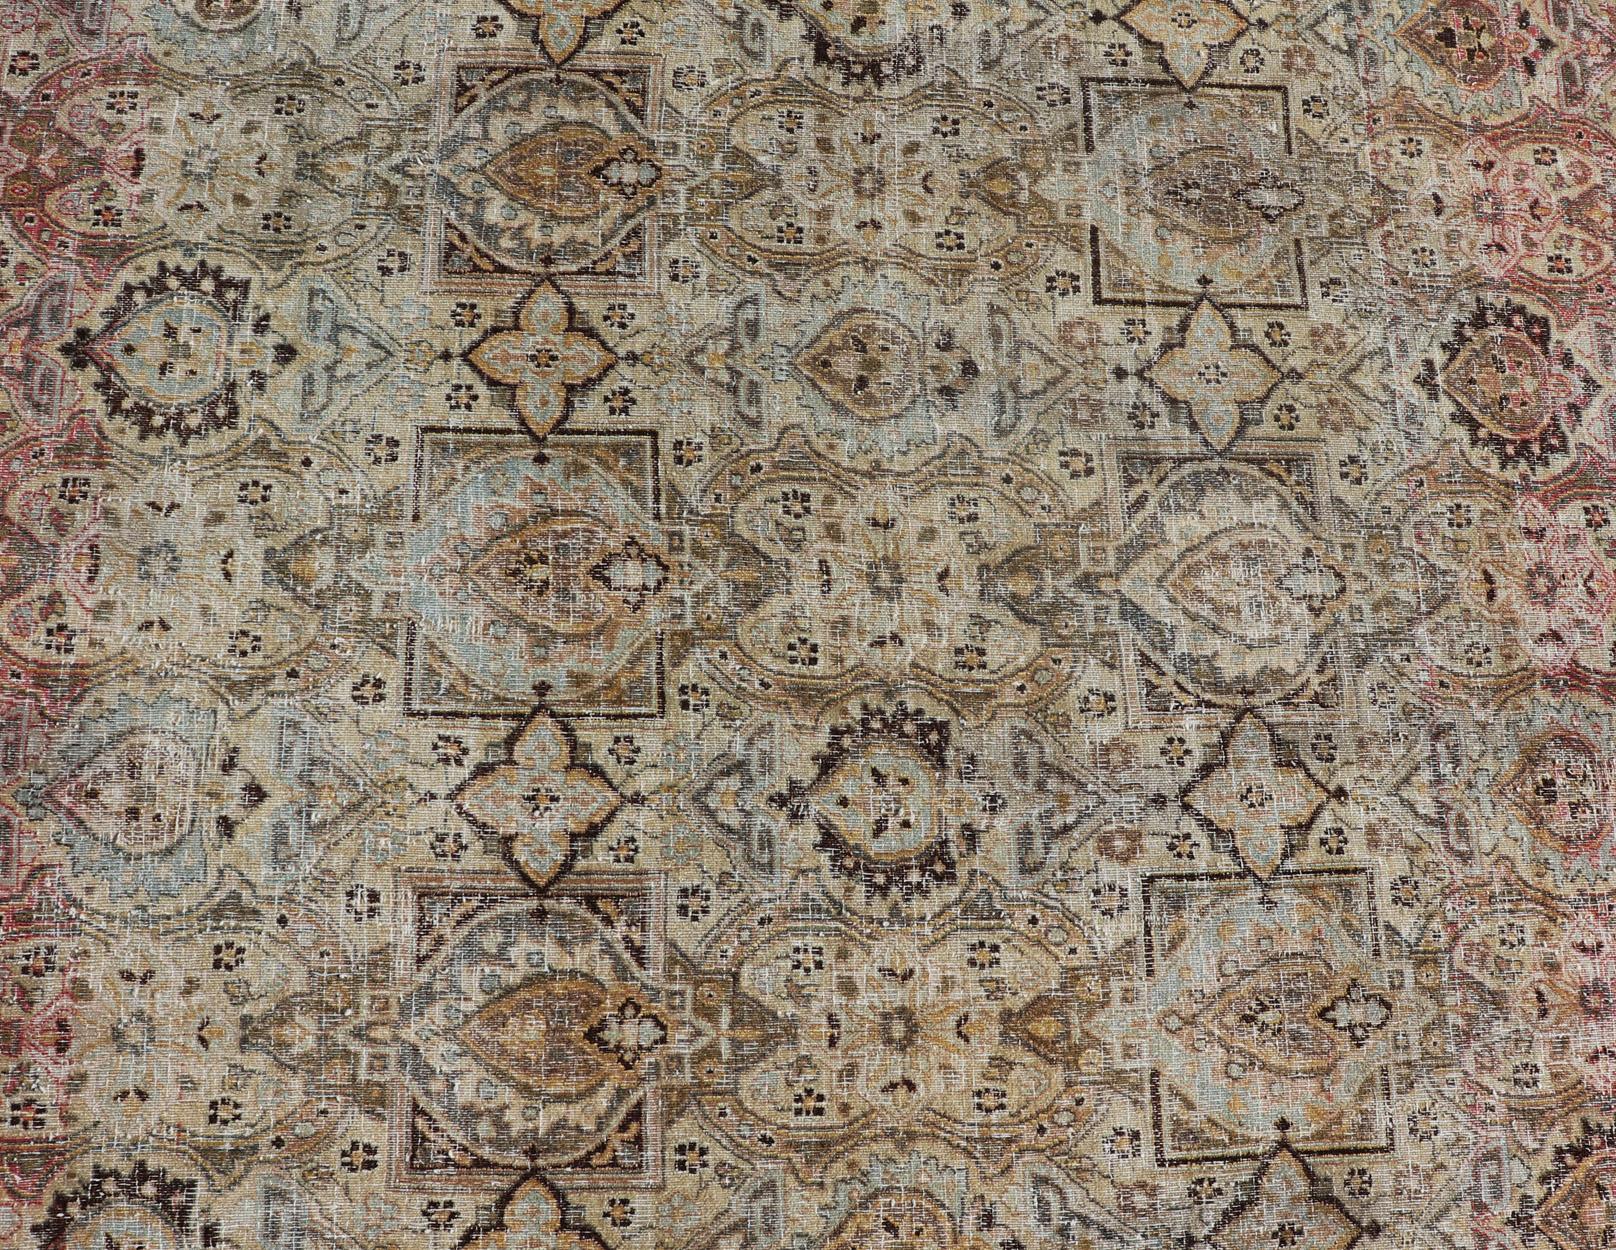  Antique Persian Khorassan Rug with Palmettes, Geometric Flowers in Soft Tones For Sale 12